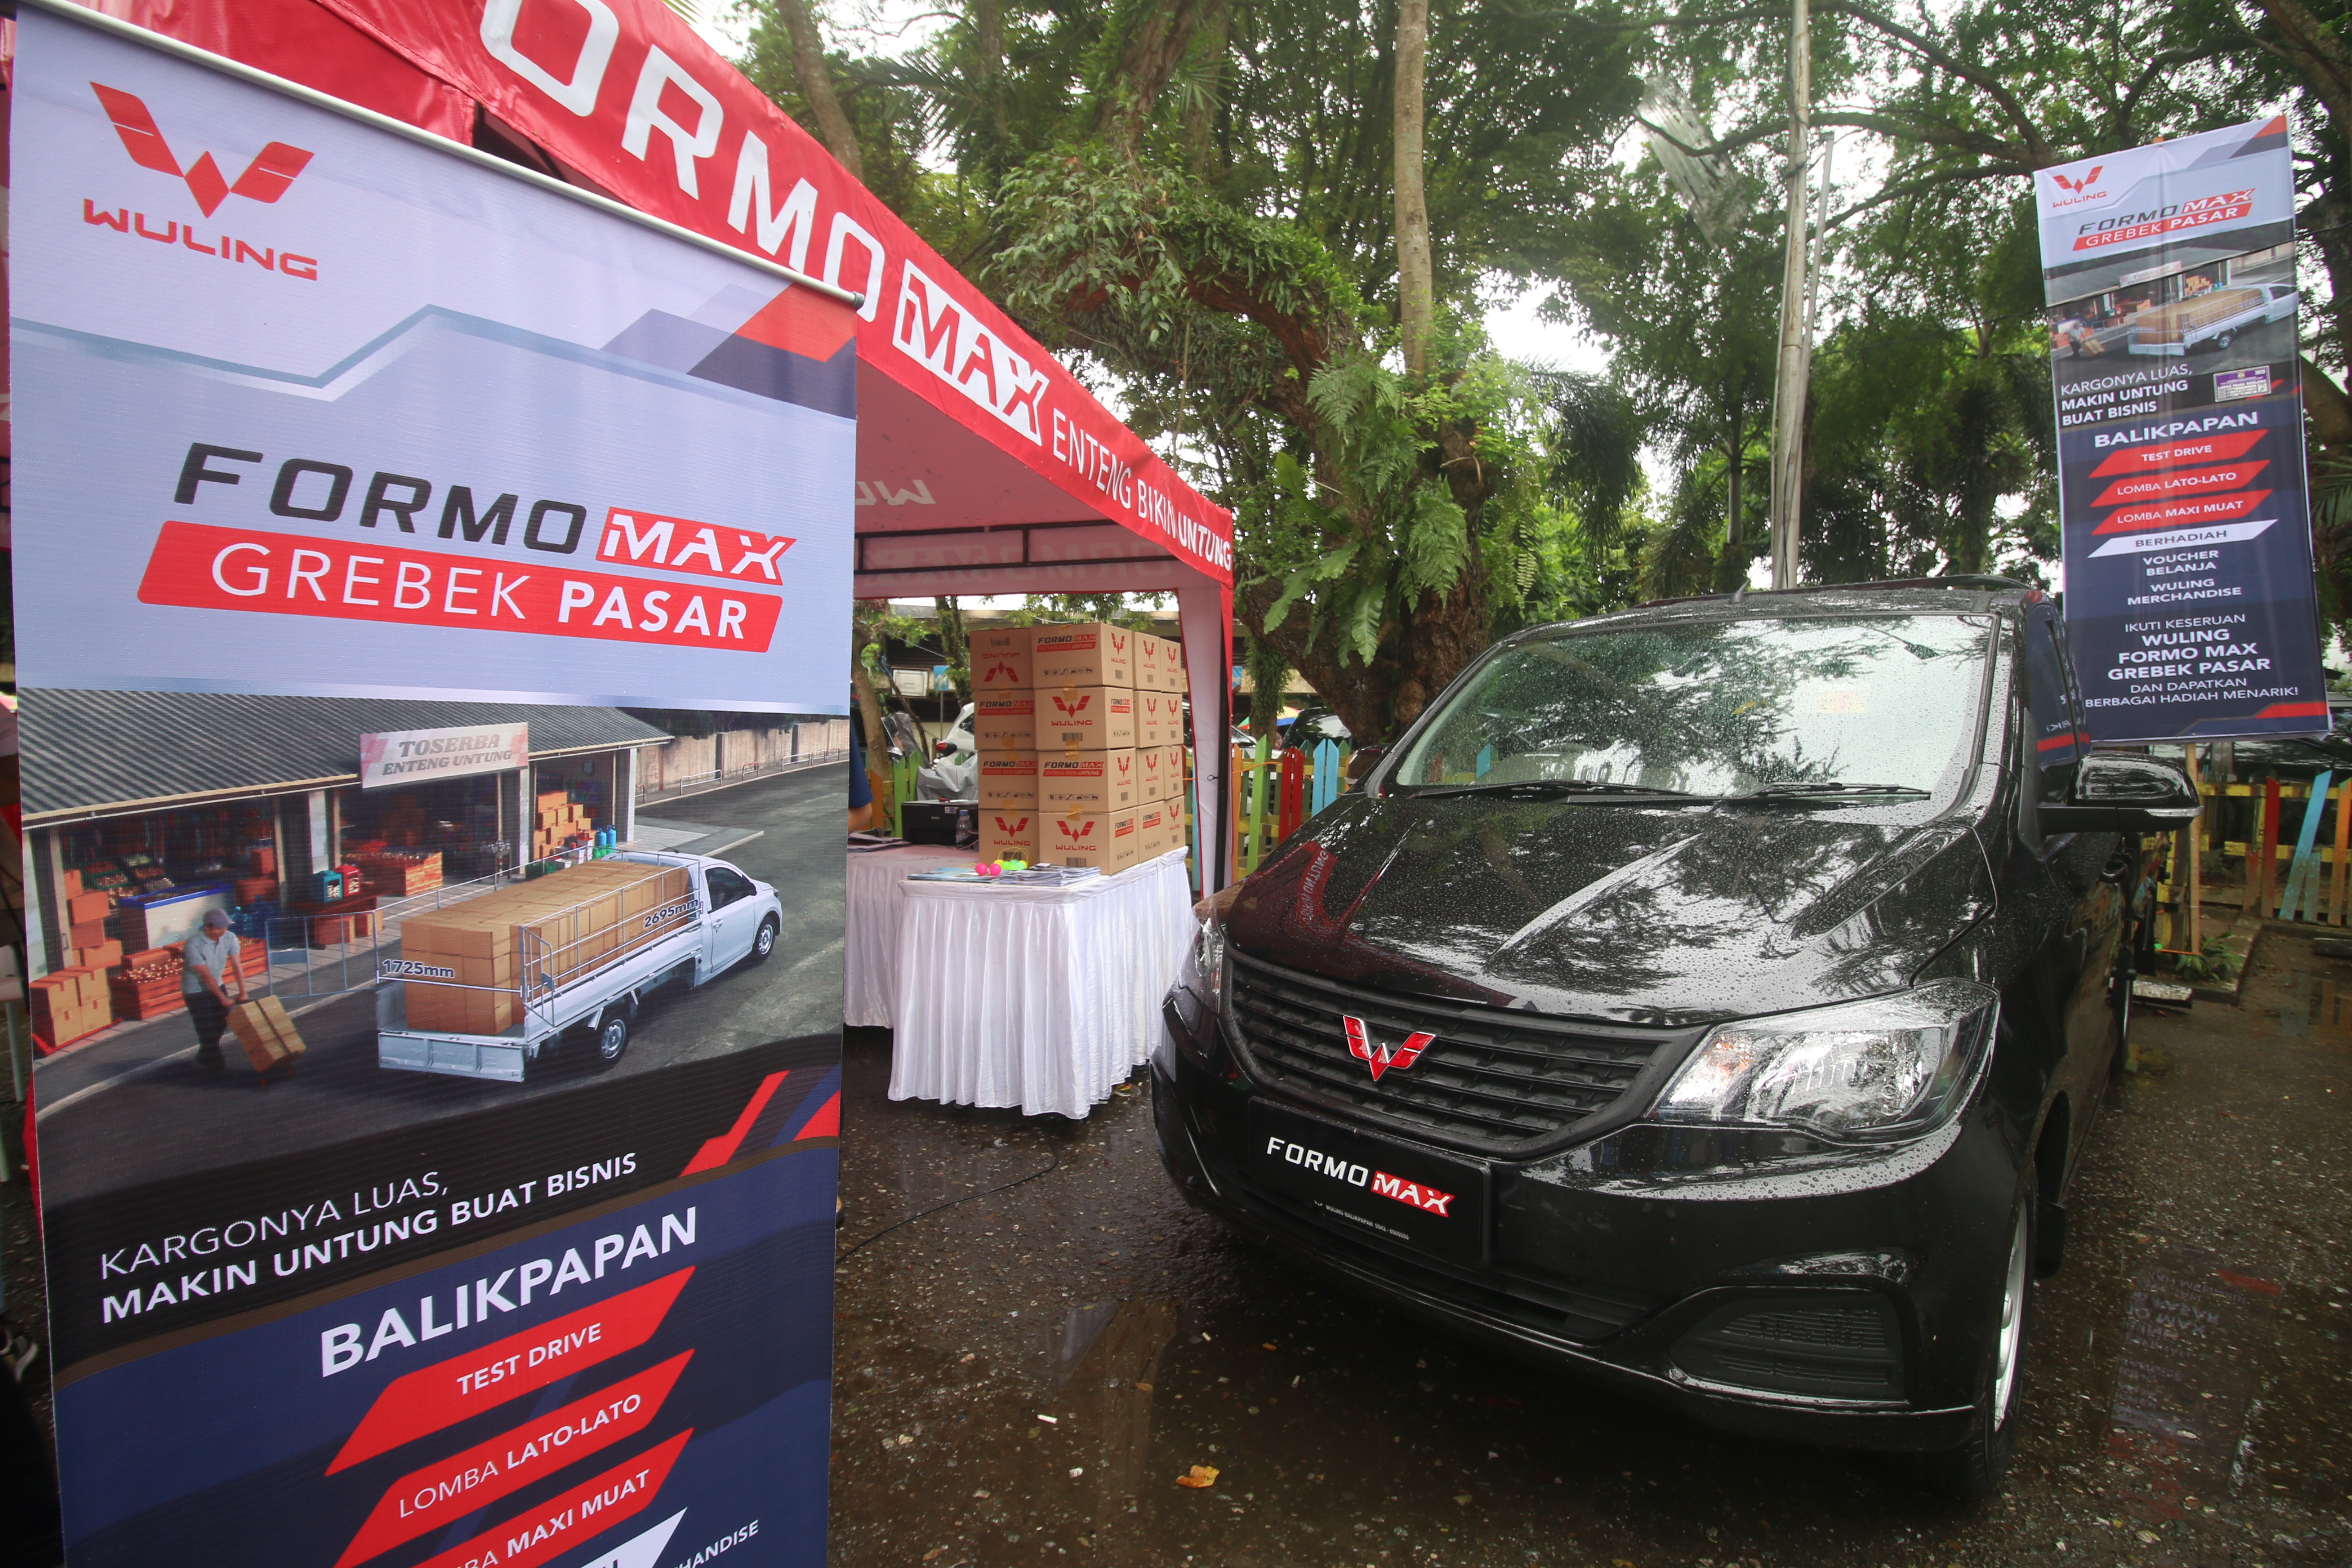 Image Wuling Formo Max, “Enteng Bikin Untung” Pick Up, Officially Launched in Balikpapan